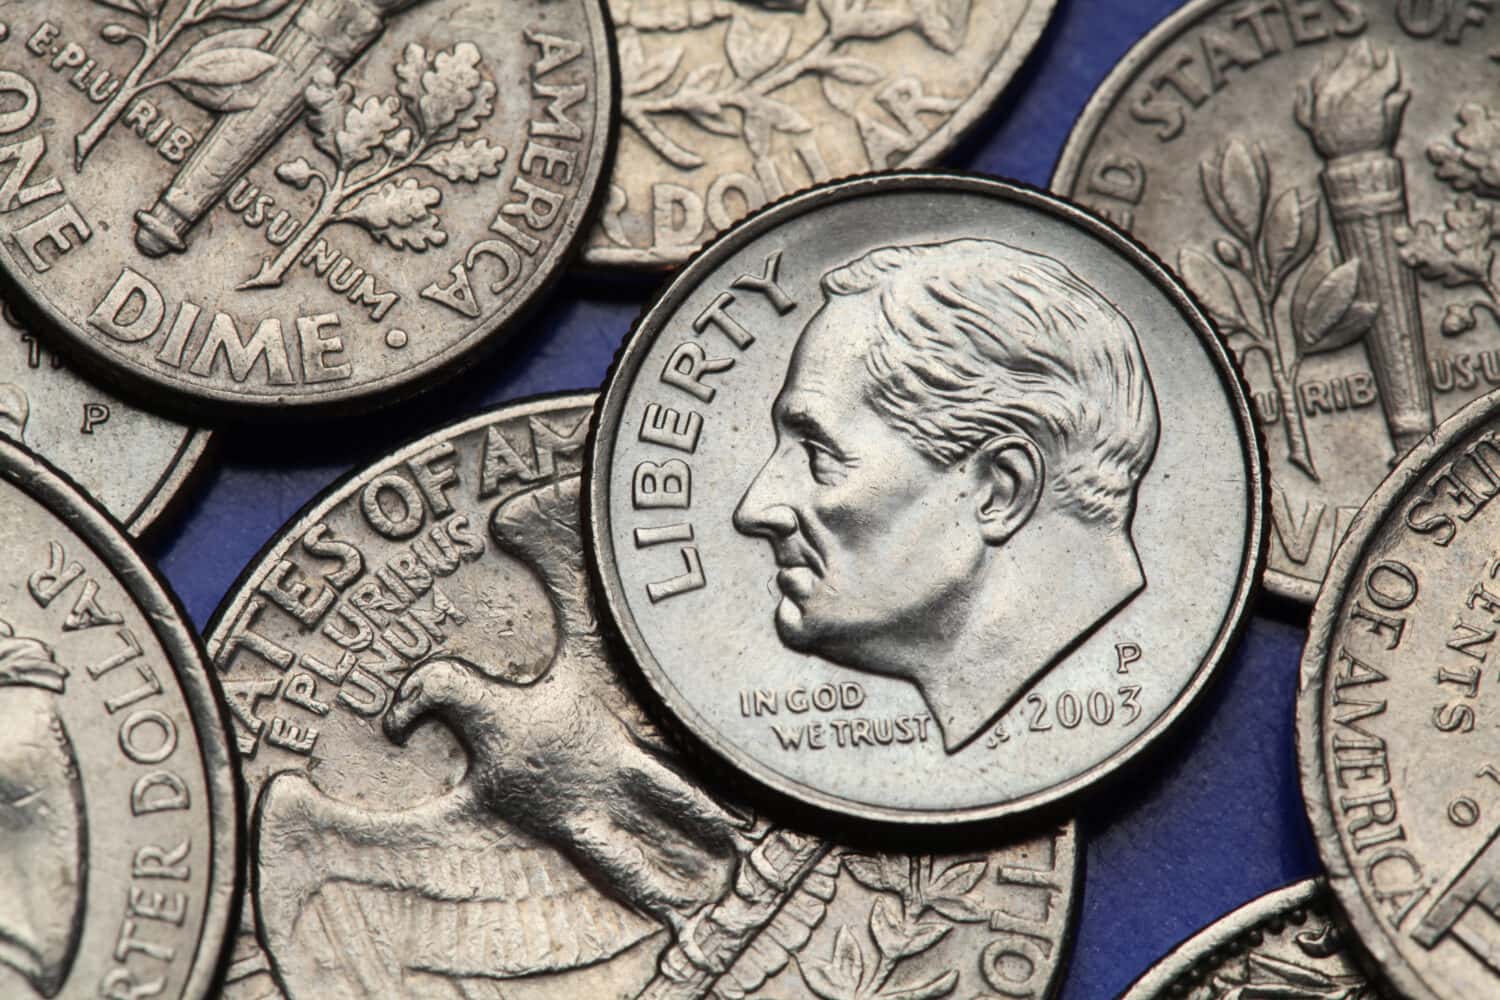 Coins of USA. Franklin D. Roosevelt depicted on the US dime coin.